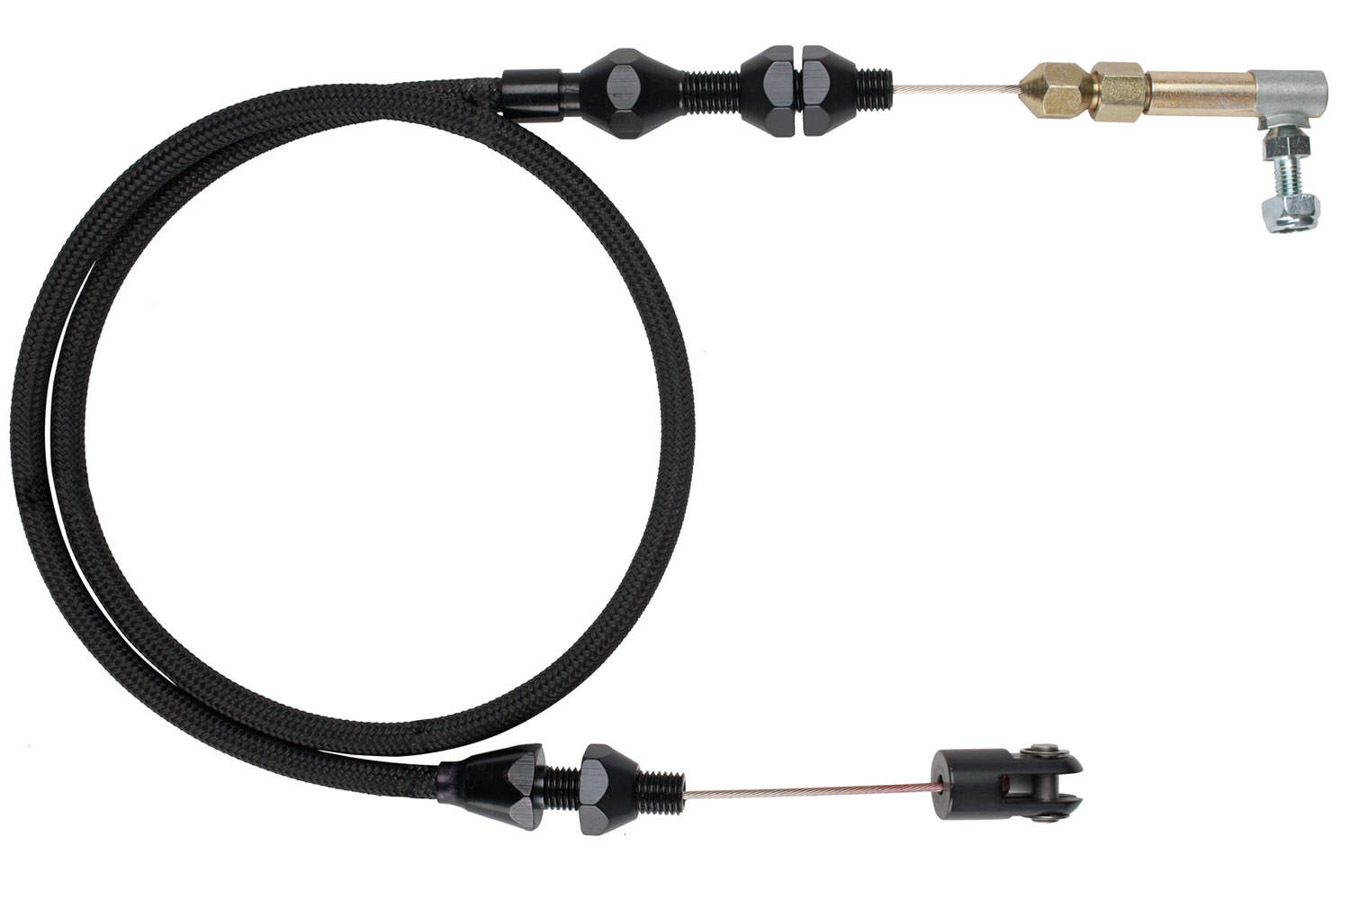 Lokar XTC-1000HT Throttle Cable, Hi-Tech, 2 ft Long, Hardware Included, Braided Stainless, Black, Universal, Kit